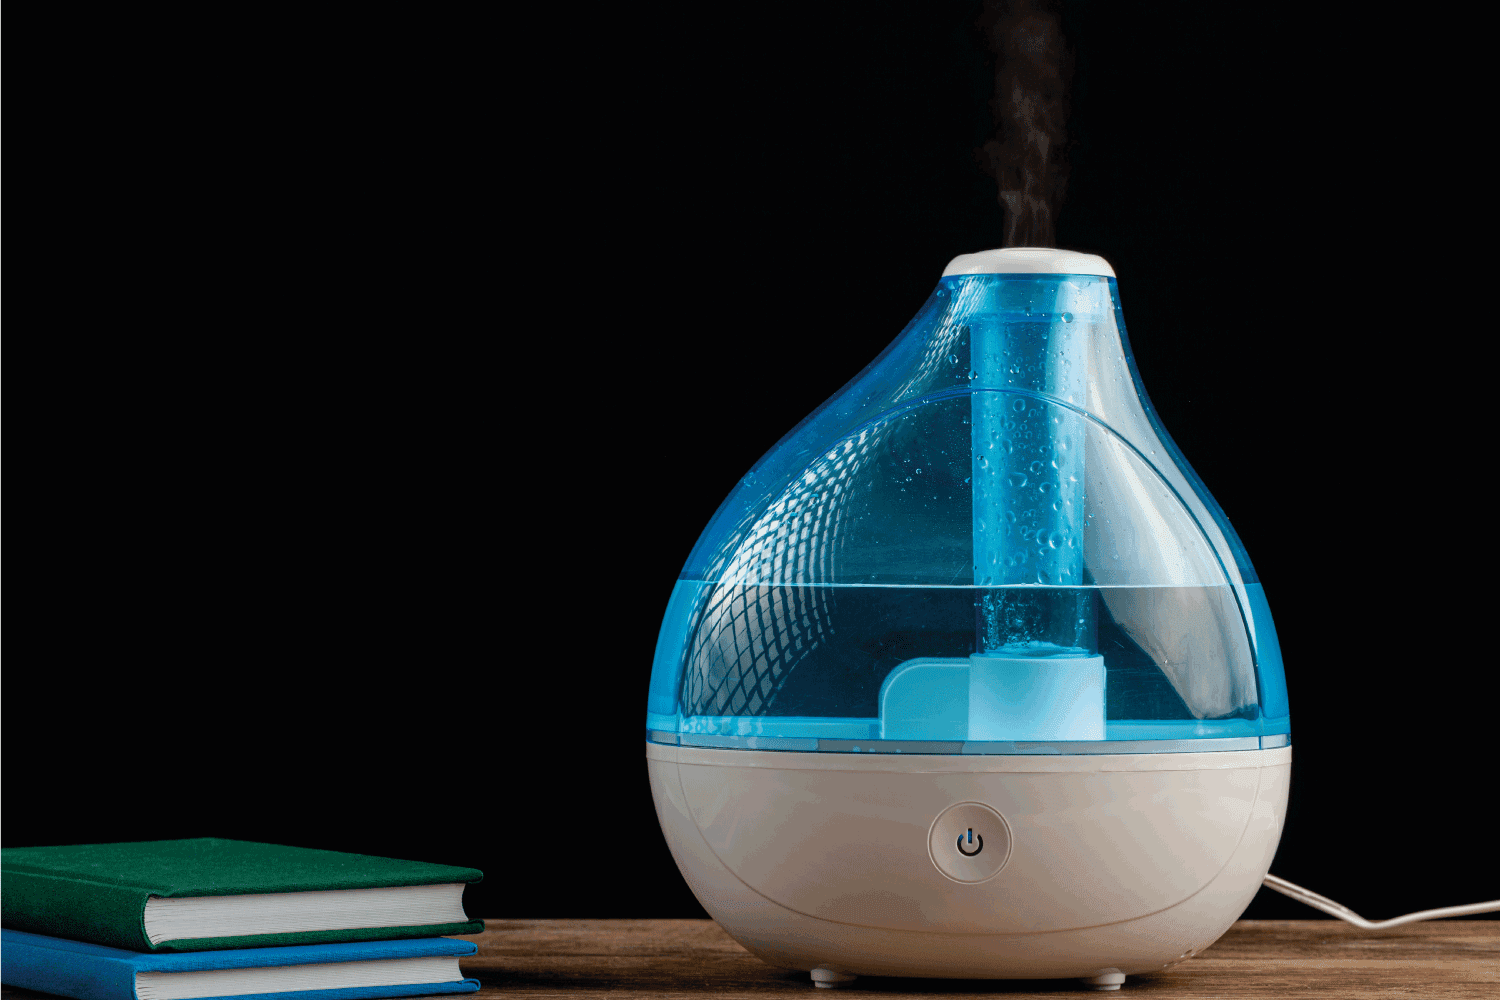 ultrasonic air humidifier creating cool mist water vapor. Stack of books are also seen on wooden tabletop.